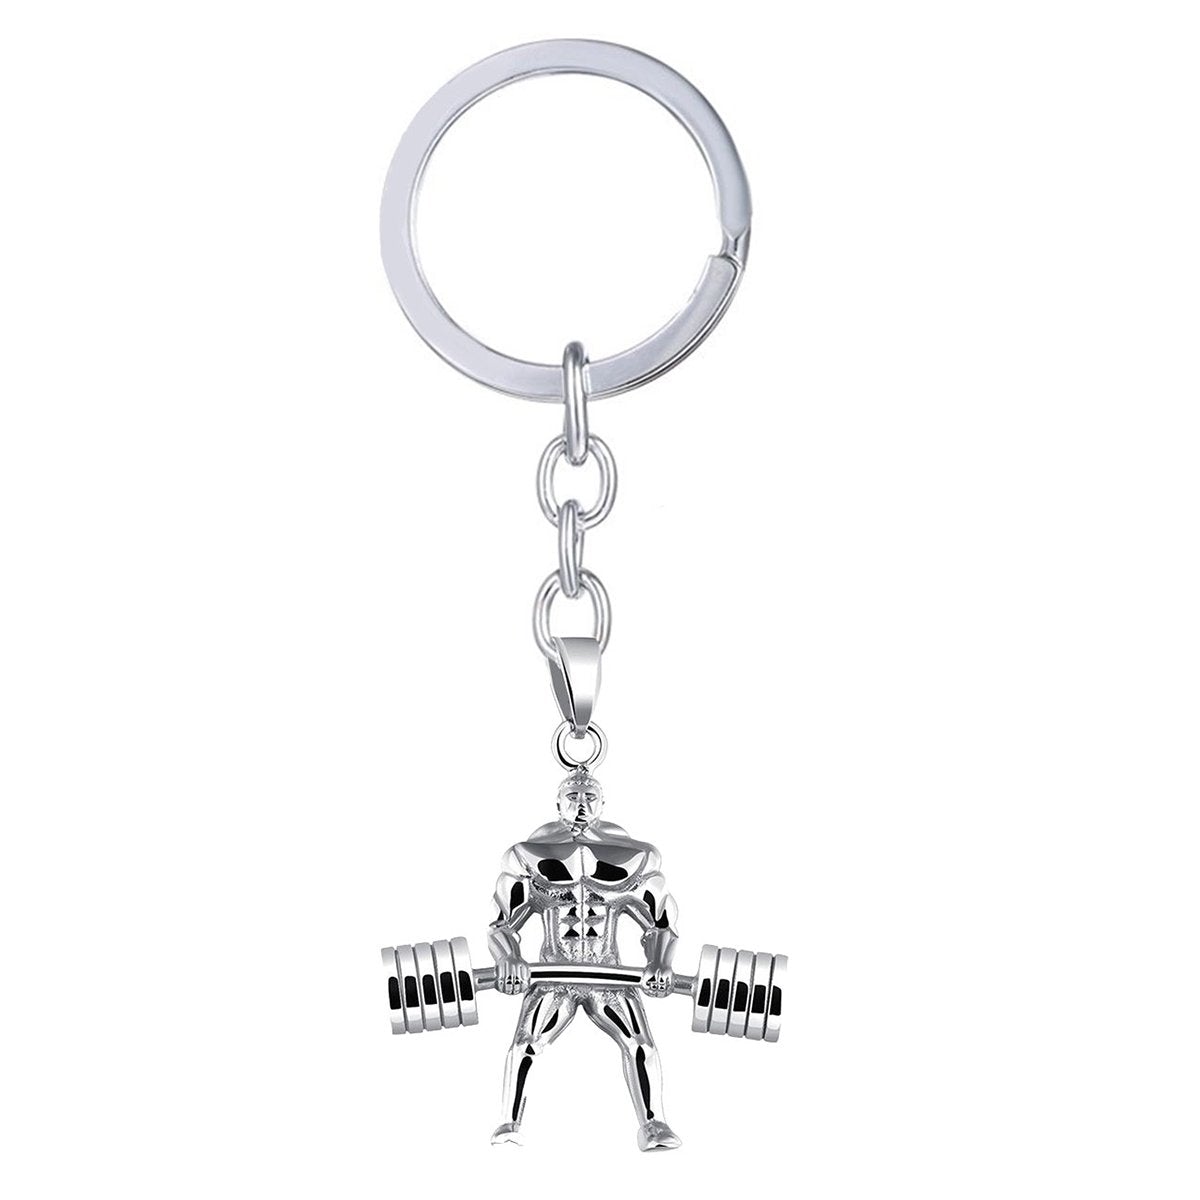 Barbell Dumbell Body Builder Weight Lifter Large Heavy Silver Stainless Steel Key Chain